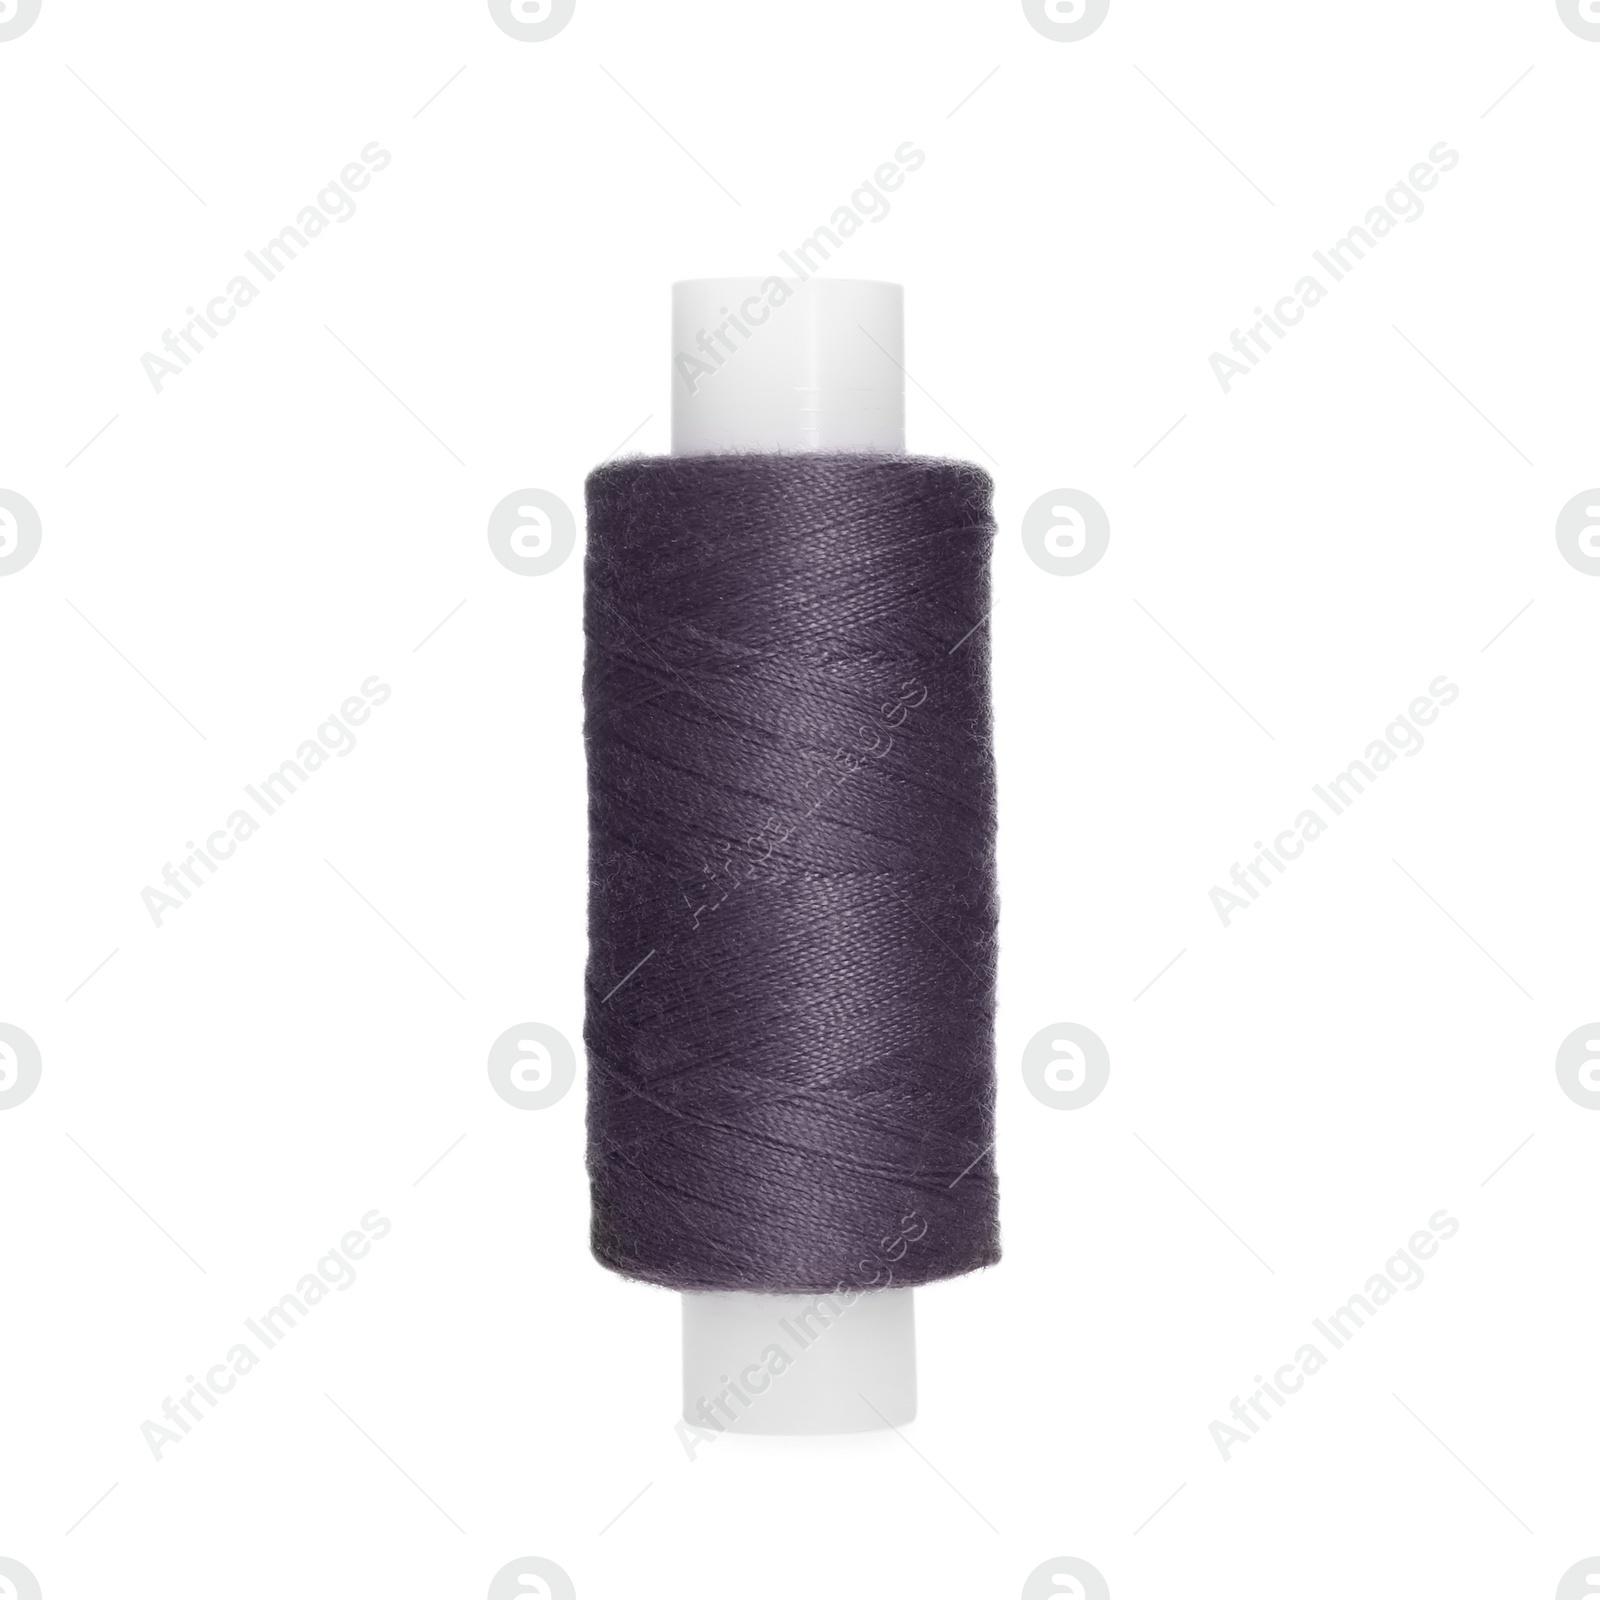 Photo of Spool of dark grey sewing thread isolated on white